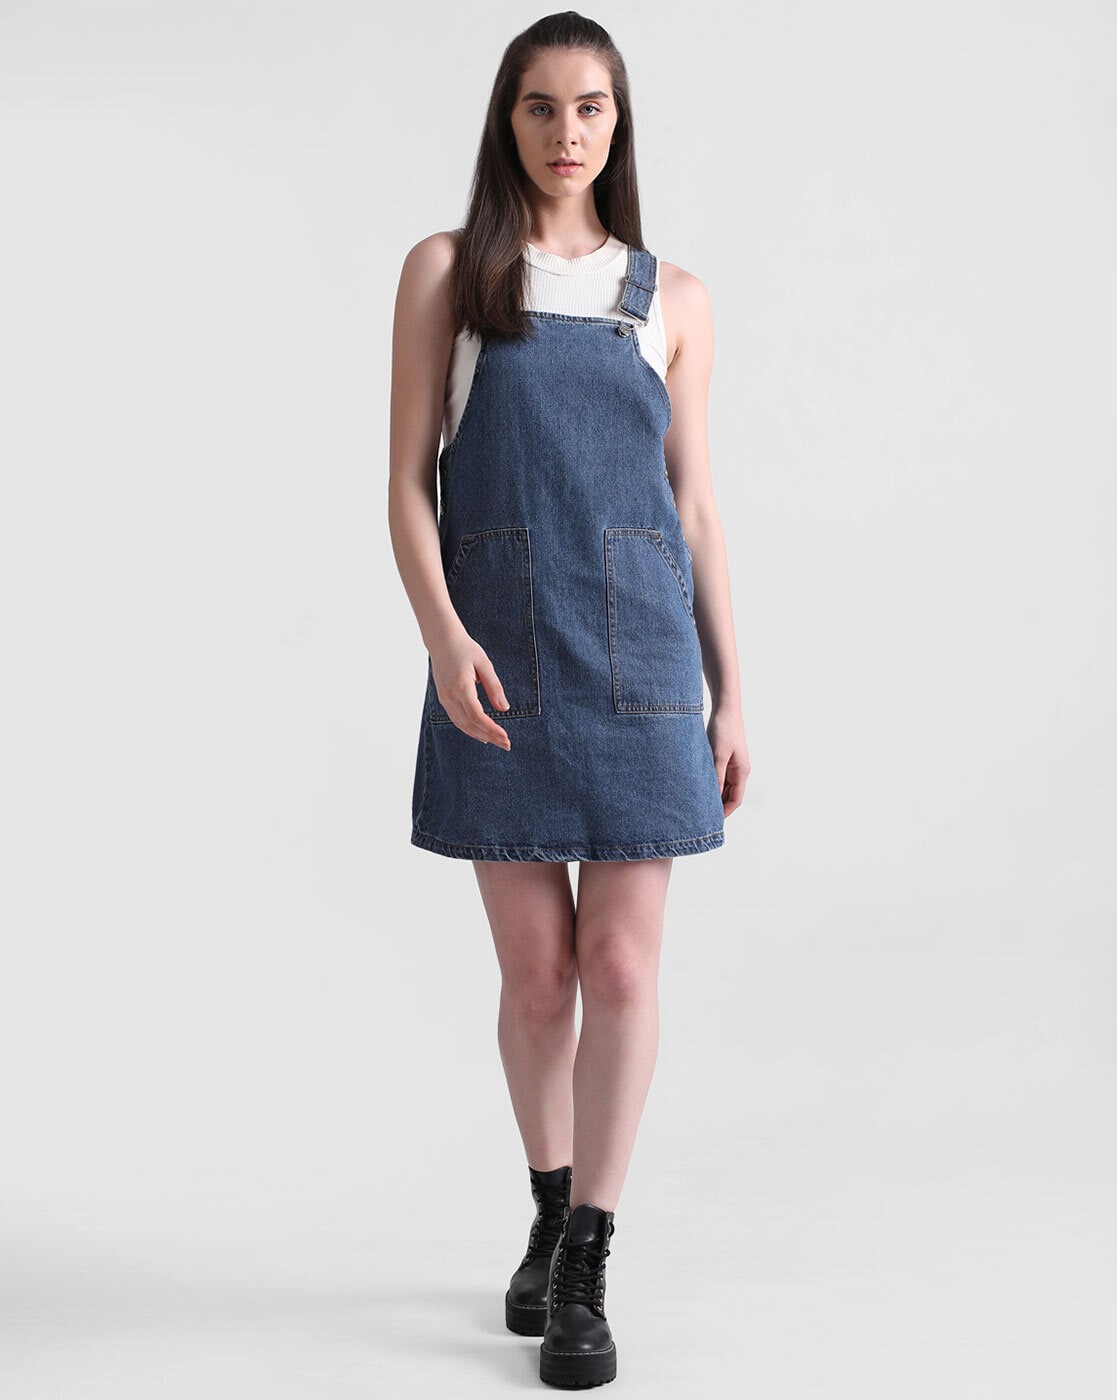 Pinafore Dress - Buy Pinafore Dresses Online at Best Prices In India |  Flipkart.com